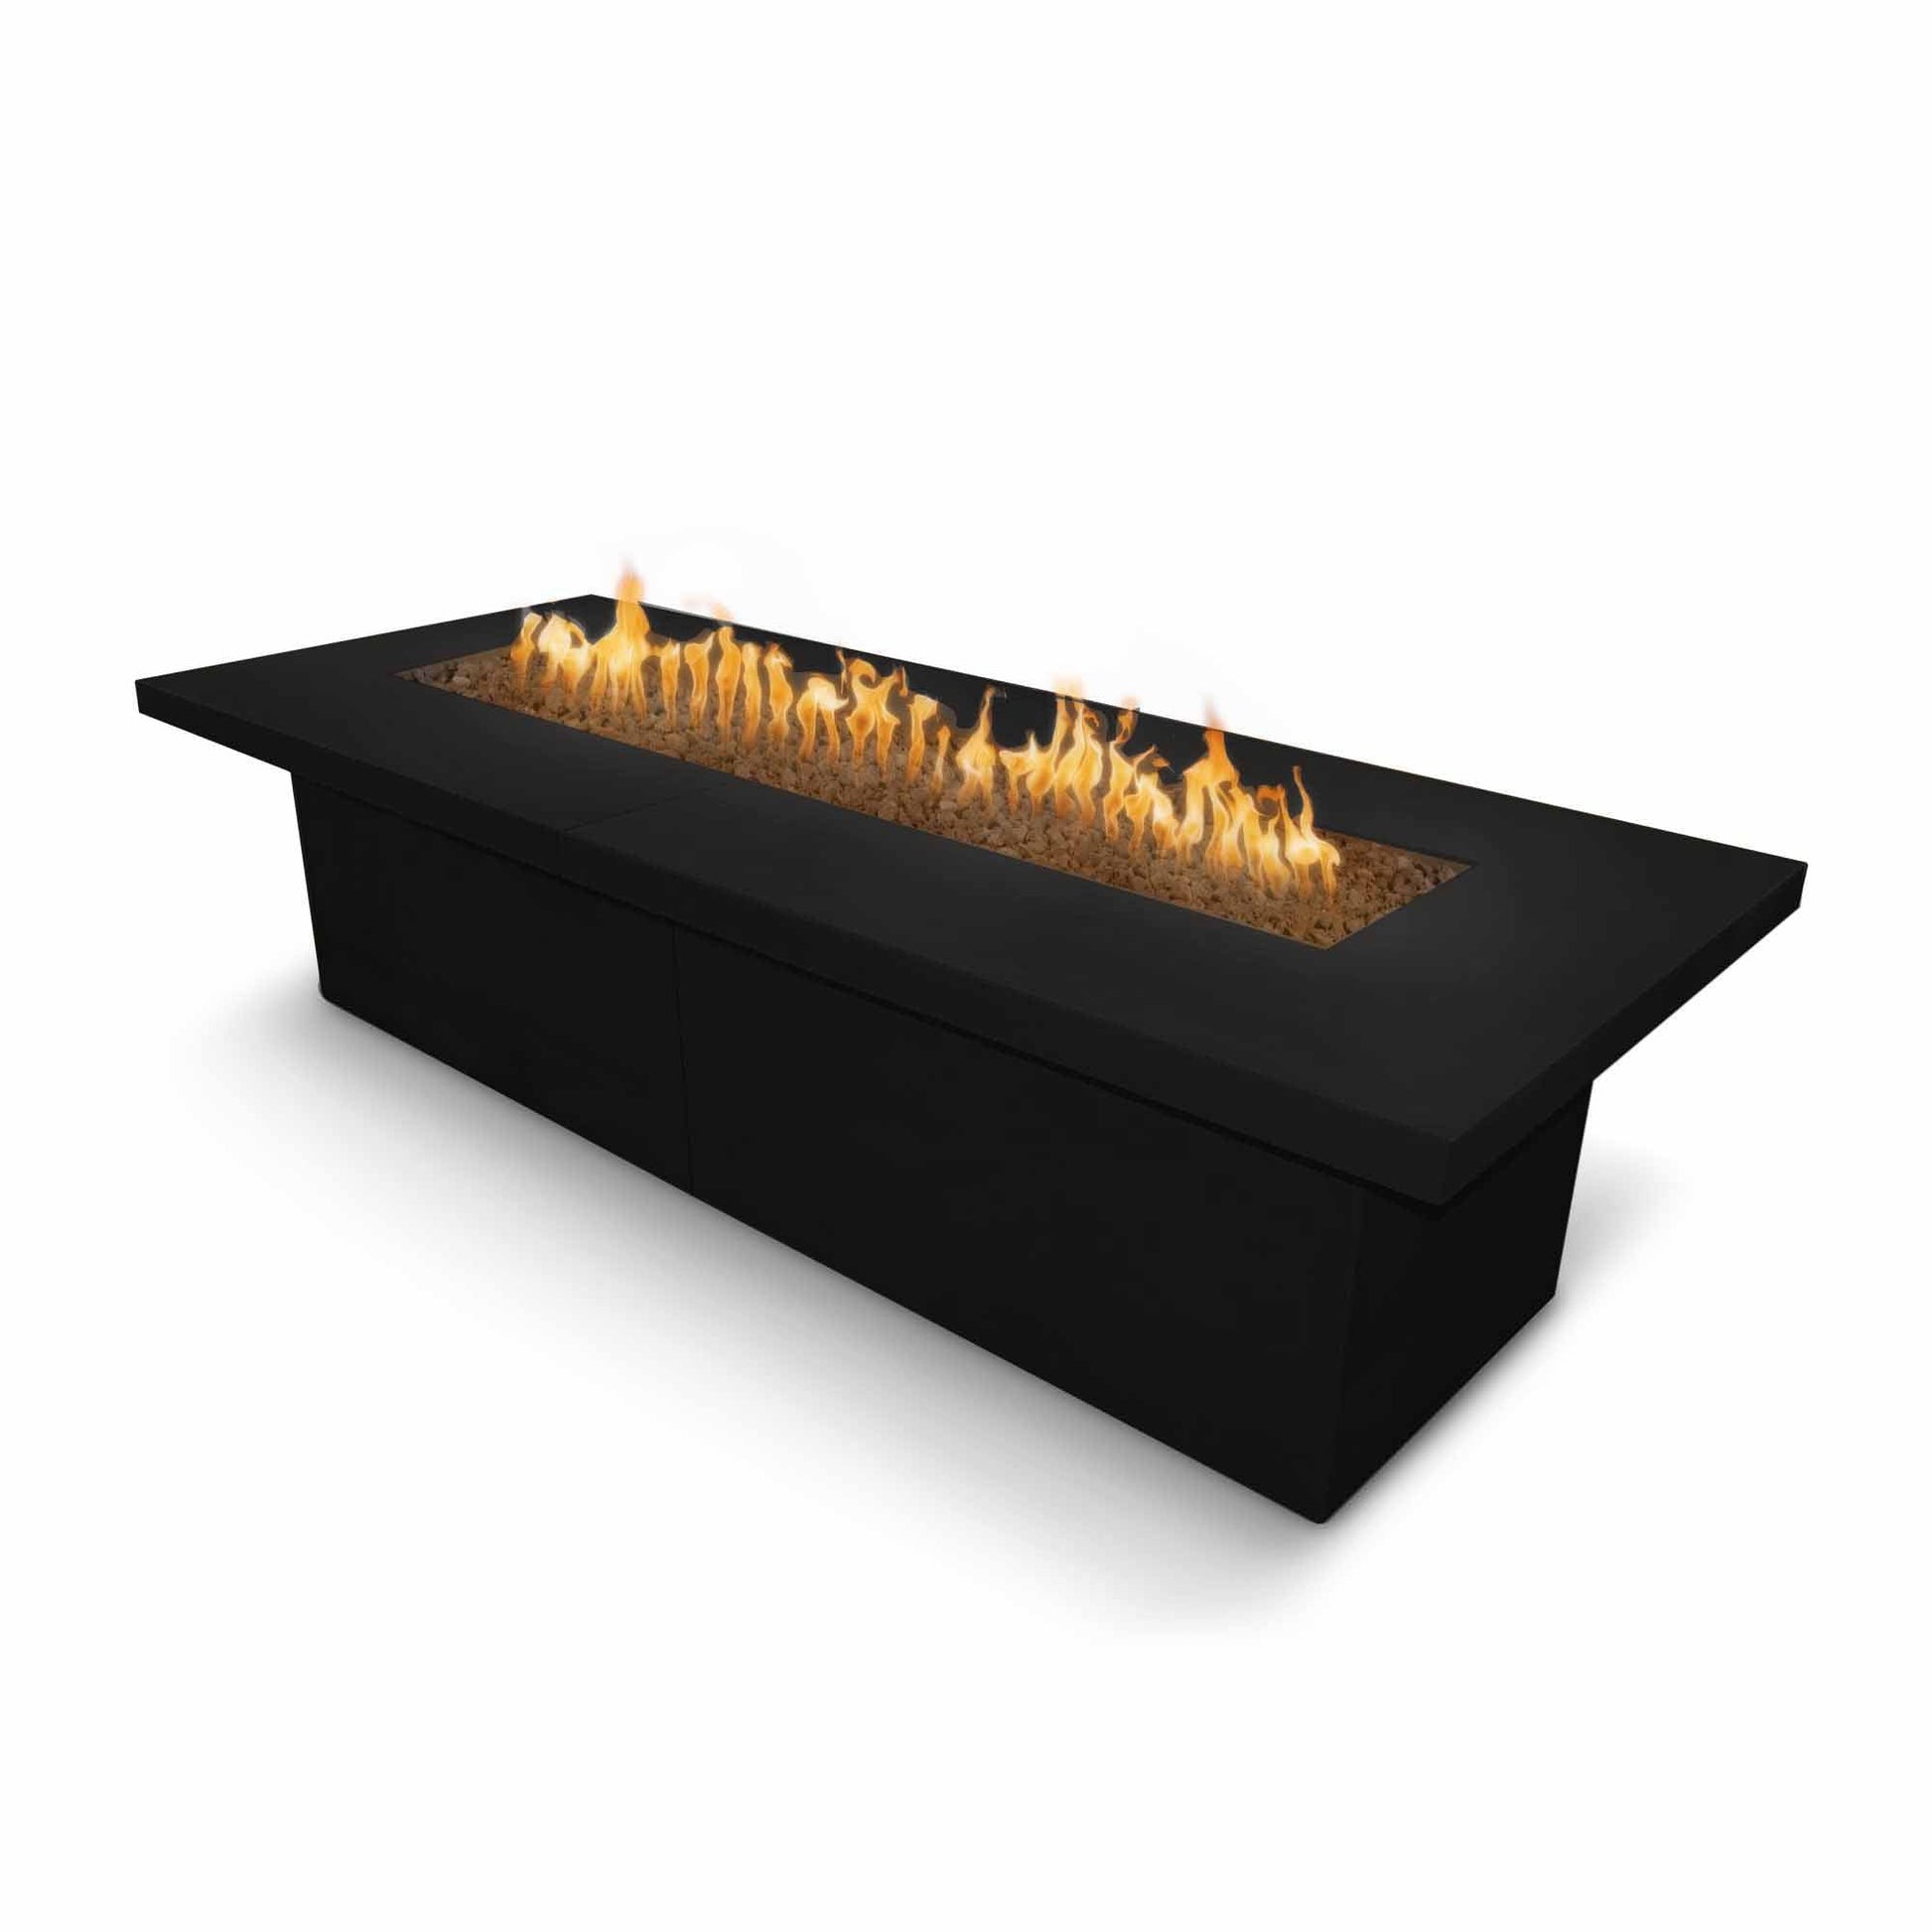 The Outdoor Plus Rectangular Newport 120" Stainless Steel Natural Gas Fire Pit with Match Lit with Flame Sense Ignition